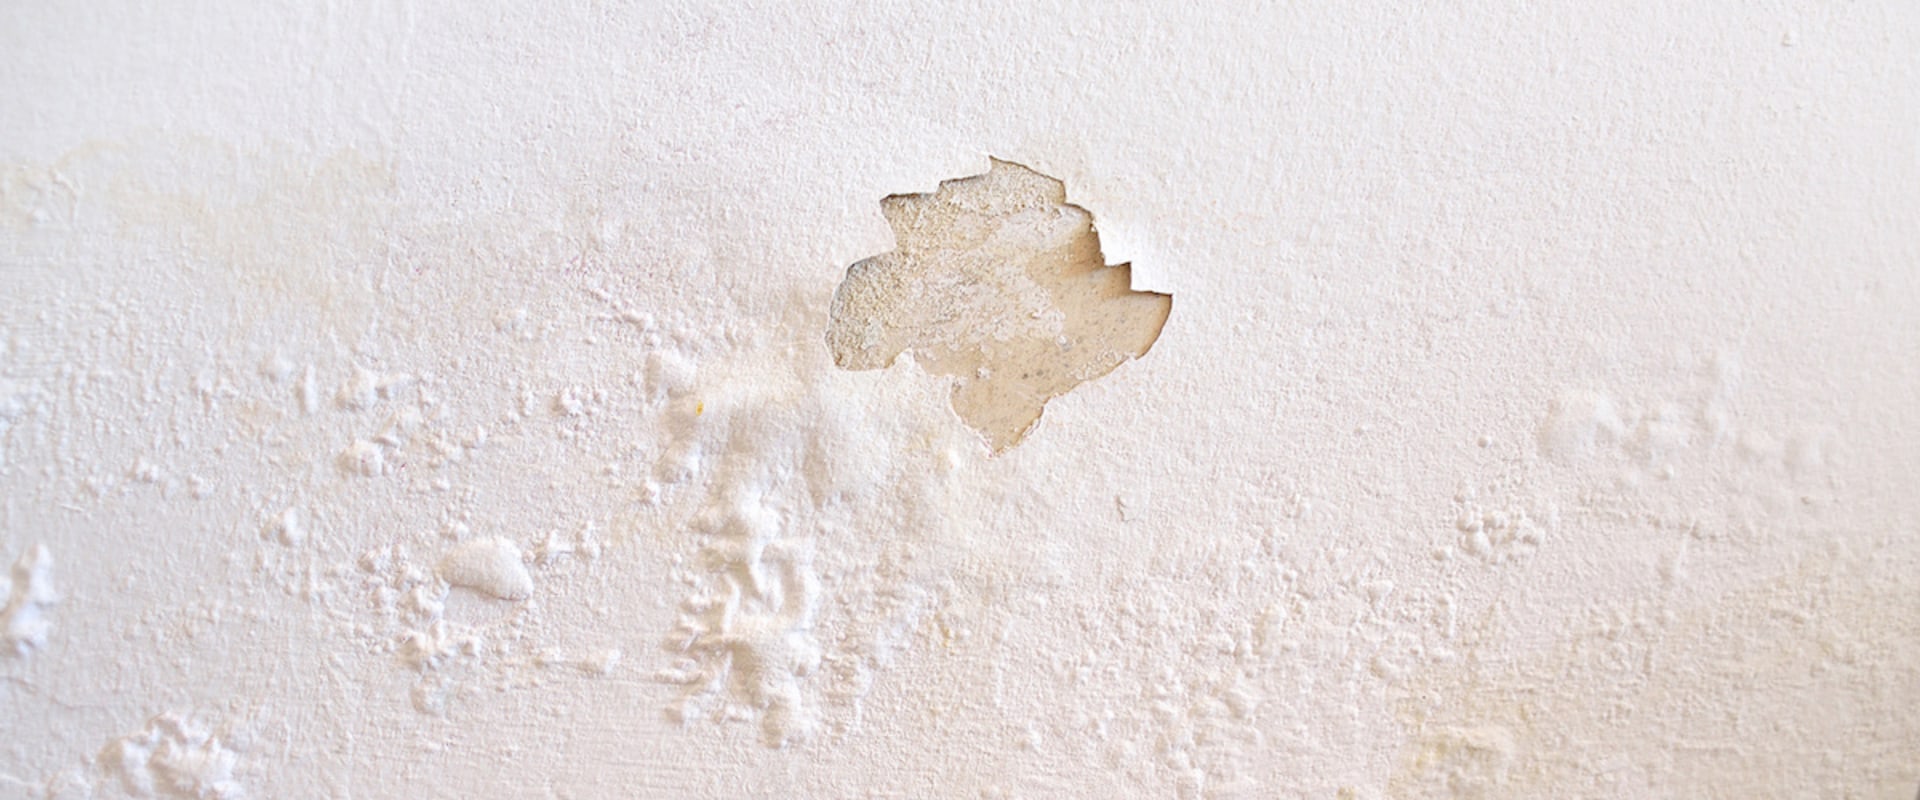 How to Treat Water Damaged Drywall - A Step-by-Step Guide